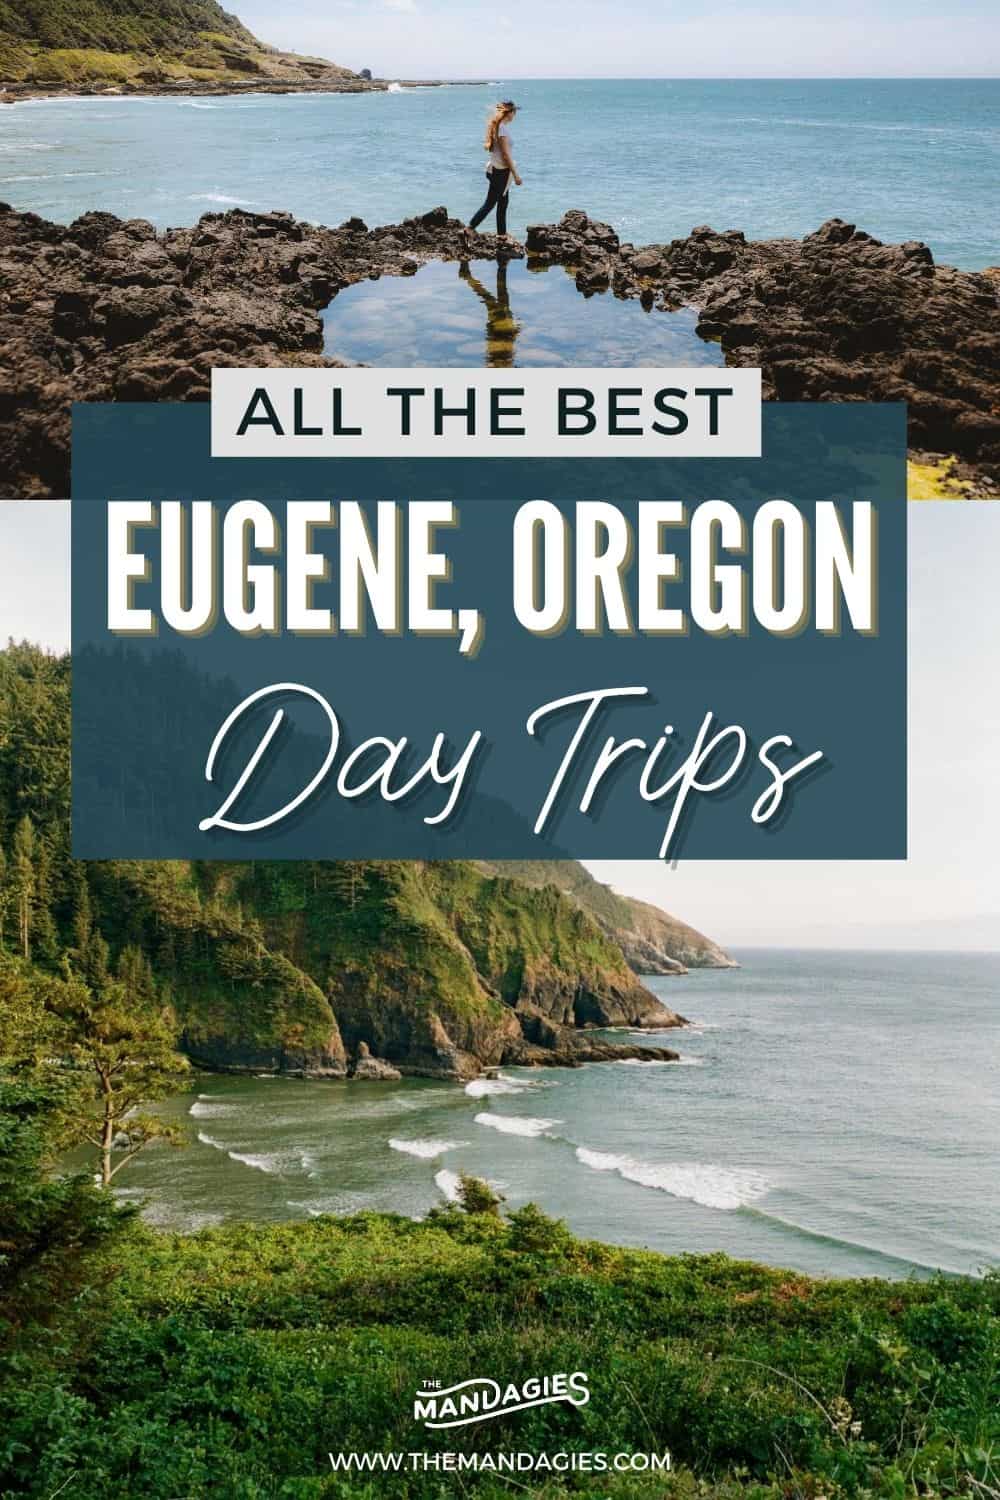 There are so many day trips from Eugene to elevate your trip to Oregon! Discover all the best things to do in Eugene in and around the area, from the Pacific Ocean to the Cascade Mountains! We're sharing epic day trips from Eugene, including Heceta Head Lighthouse, McKenzie River Highway, Sahale and Koosah Falls and so much more! #eugene #oregon #pnw #pacificnorthwest #oregoncoast #cascademountains #roadtrip #daytrip